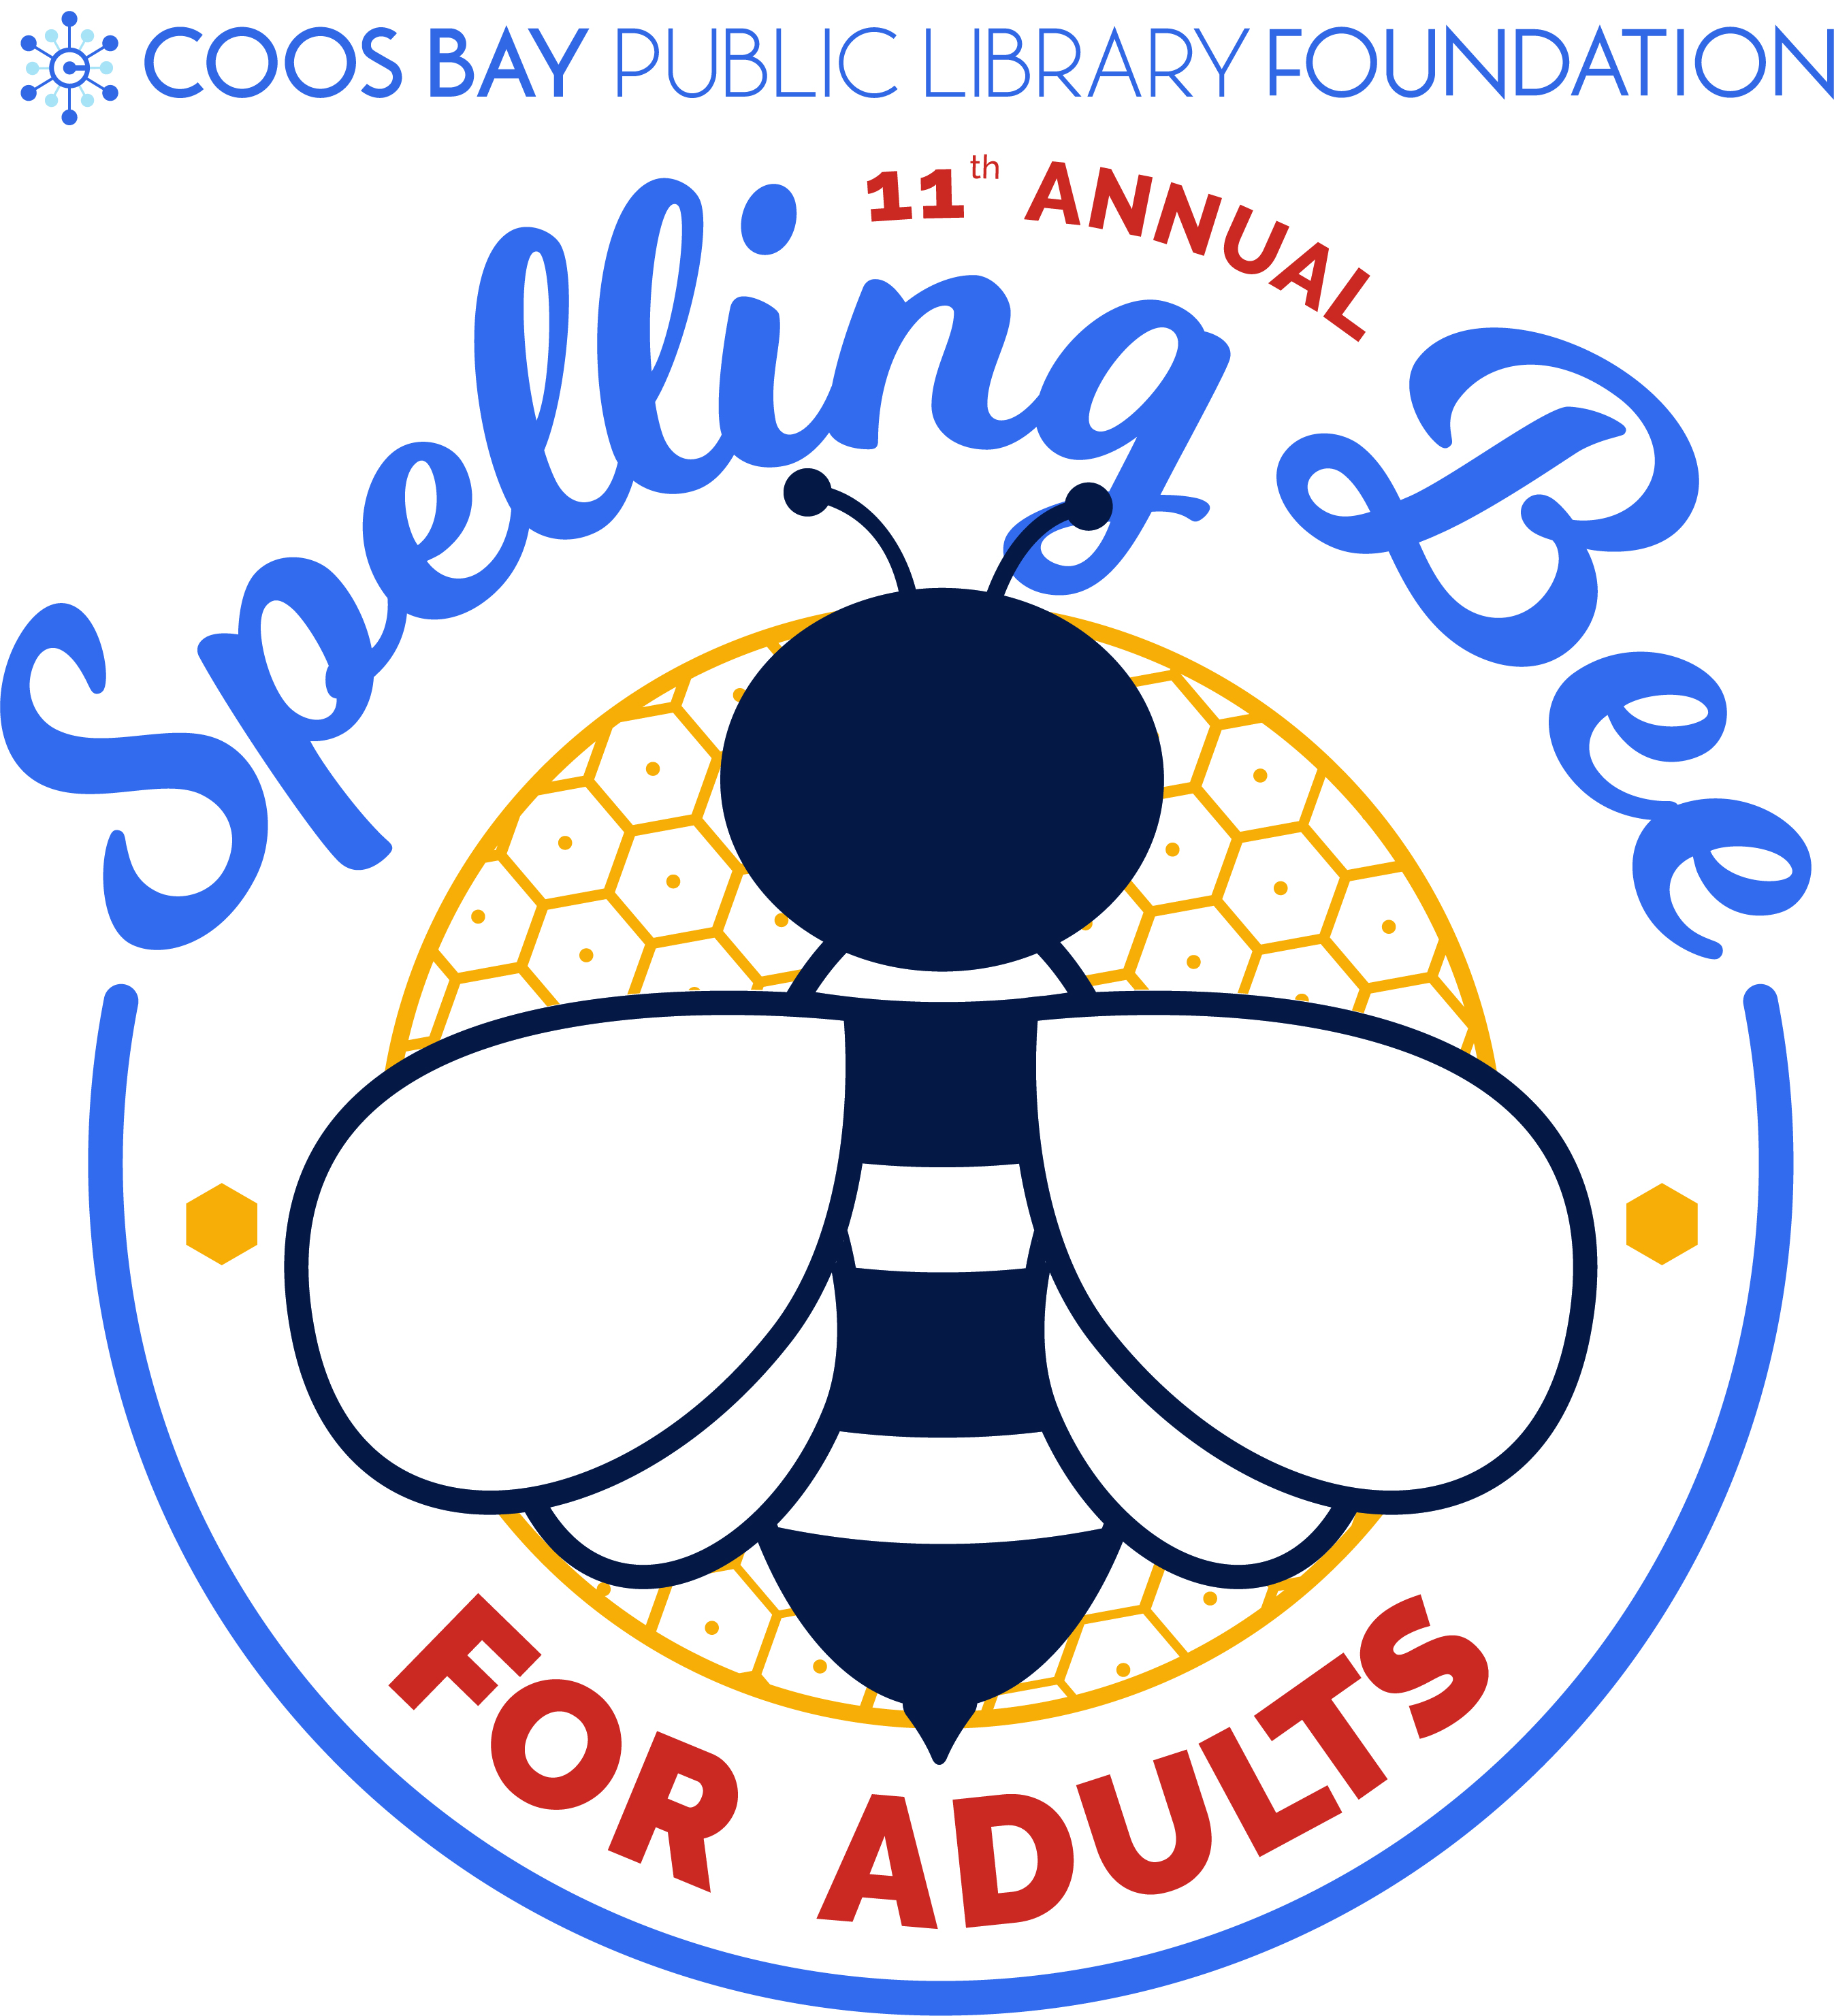 Spelling Bee for Adults logo with bee in the center